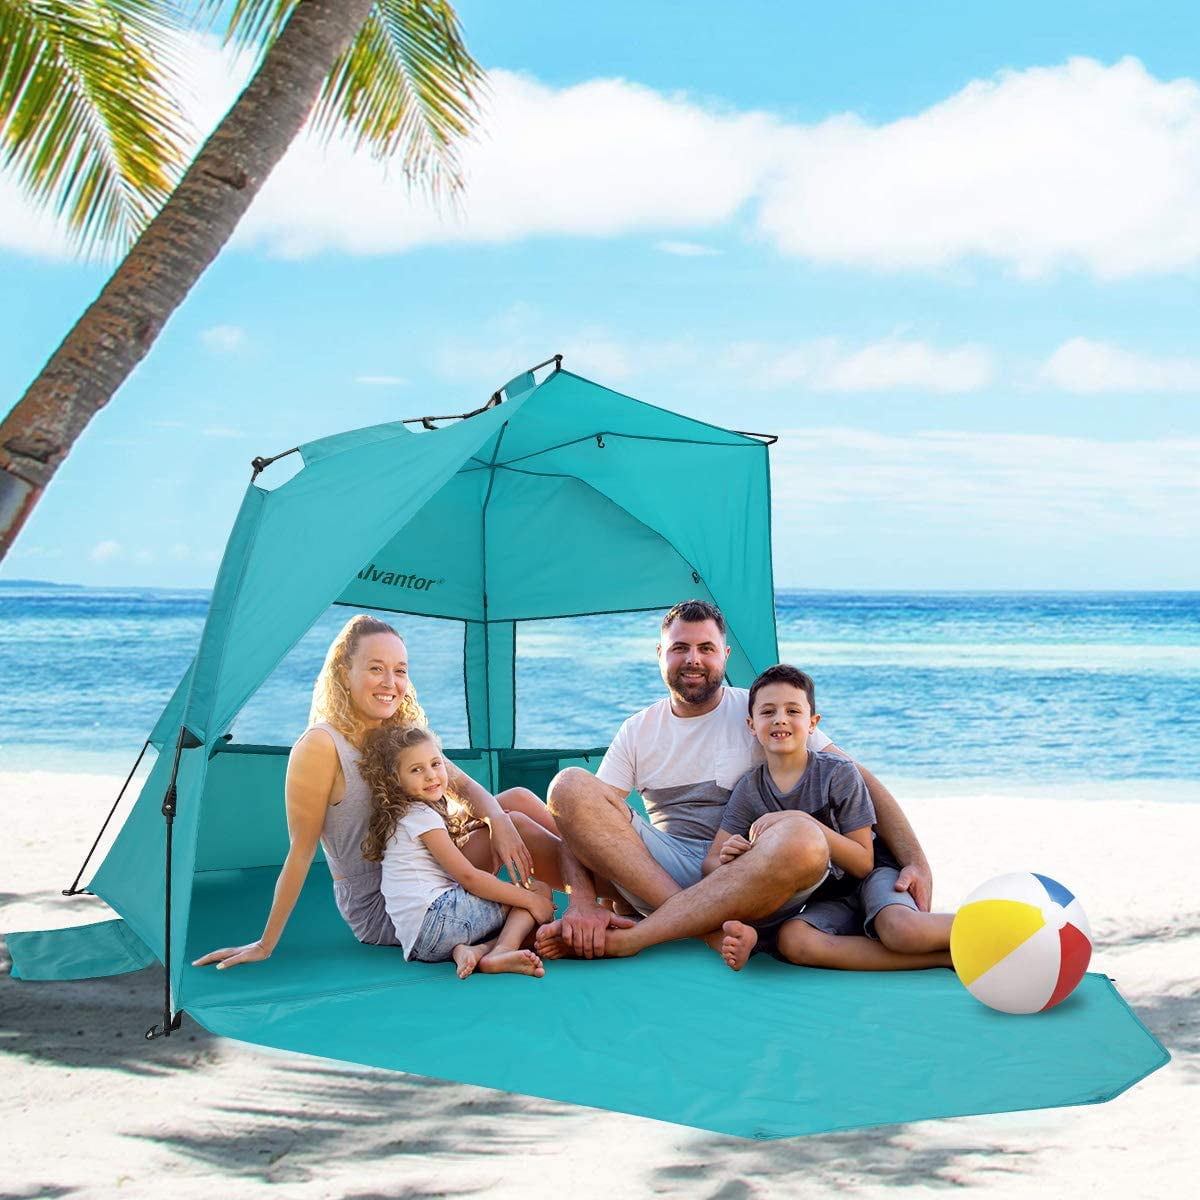 Impakt Ocean Beach Tent with Easy Clean Sand-Free Porch 4 Person XL Deluxe Tent Easy Setup Pop Up Sun Shade Wind Blocker